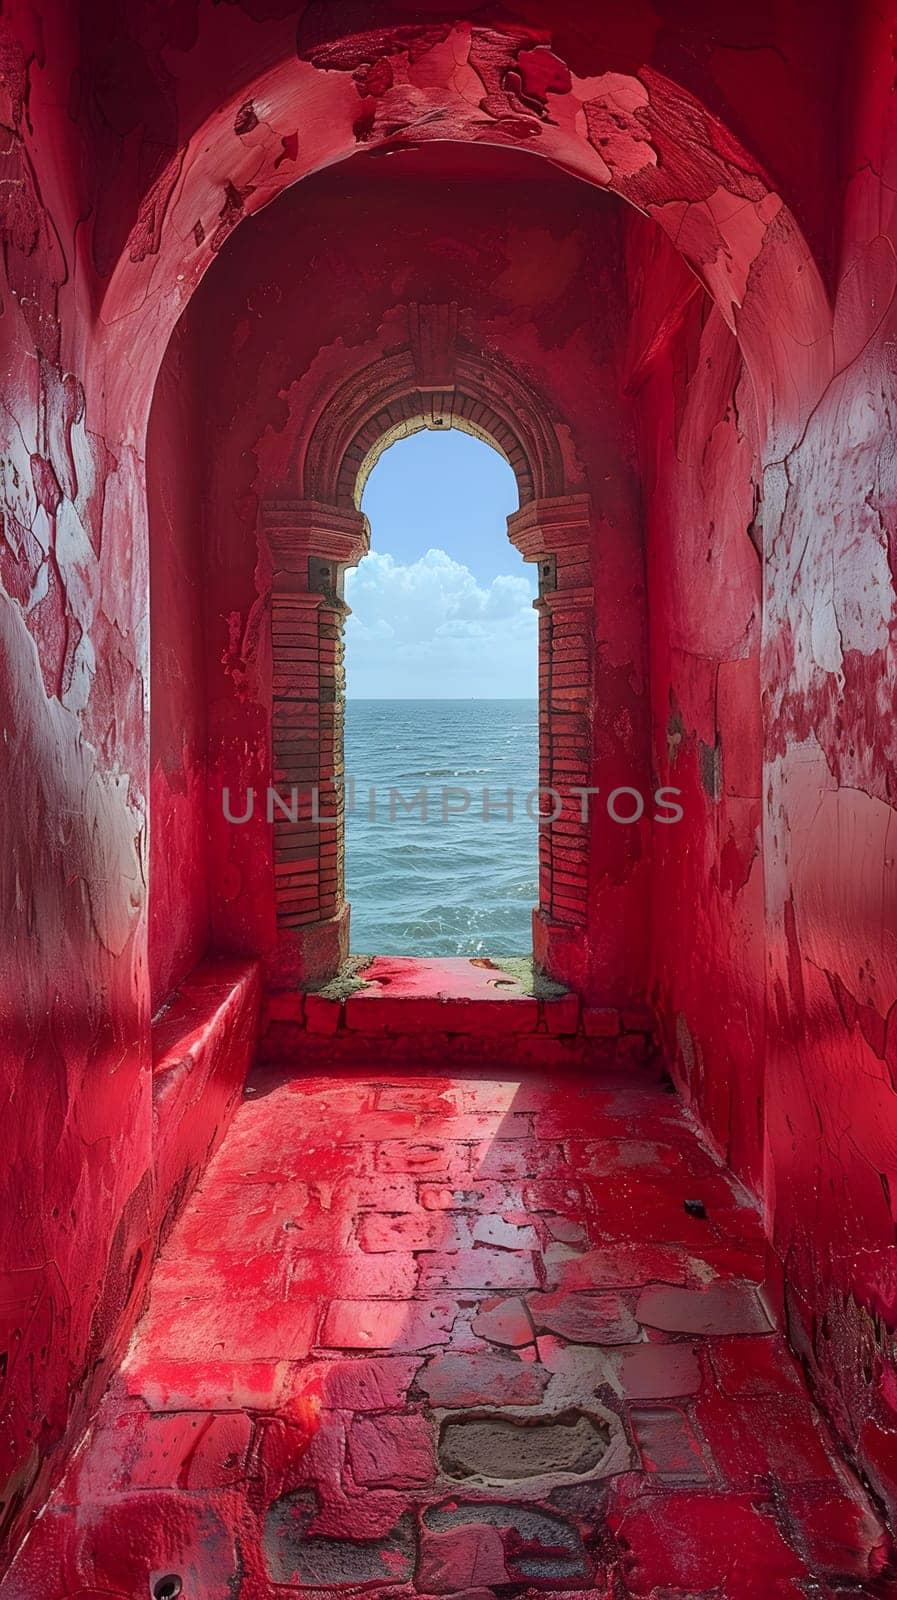 A magenta room with a window framed by a brick facade, overlooking the liquid landscape of the ocean under a sky filled with art